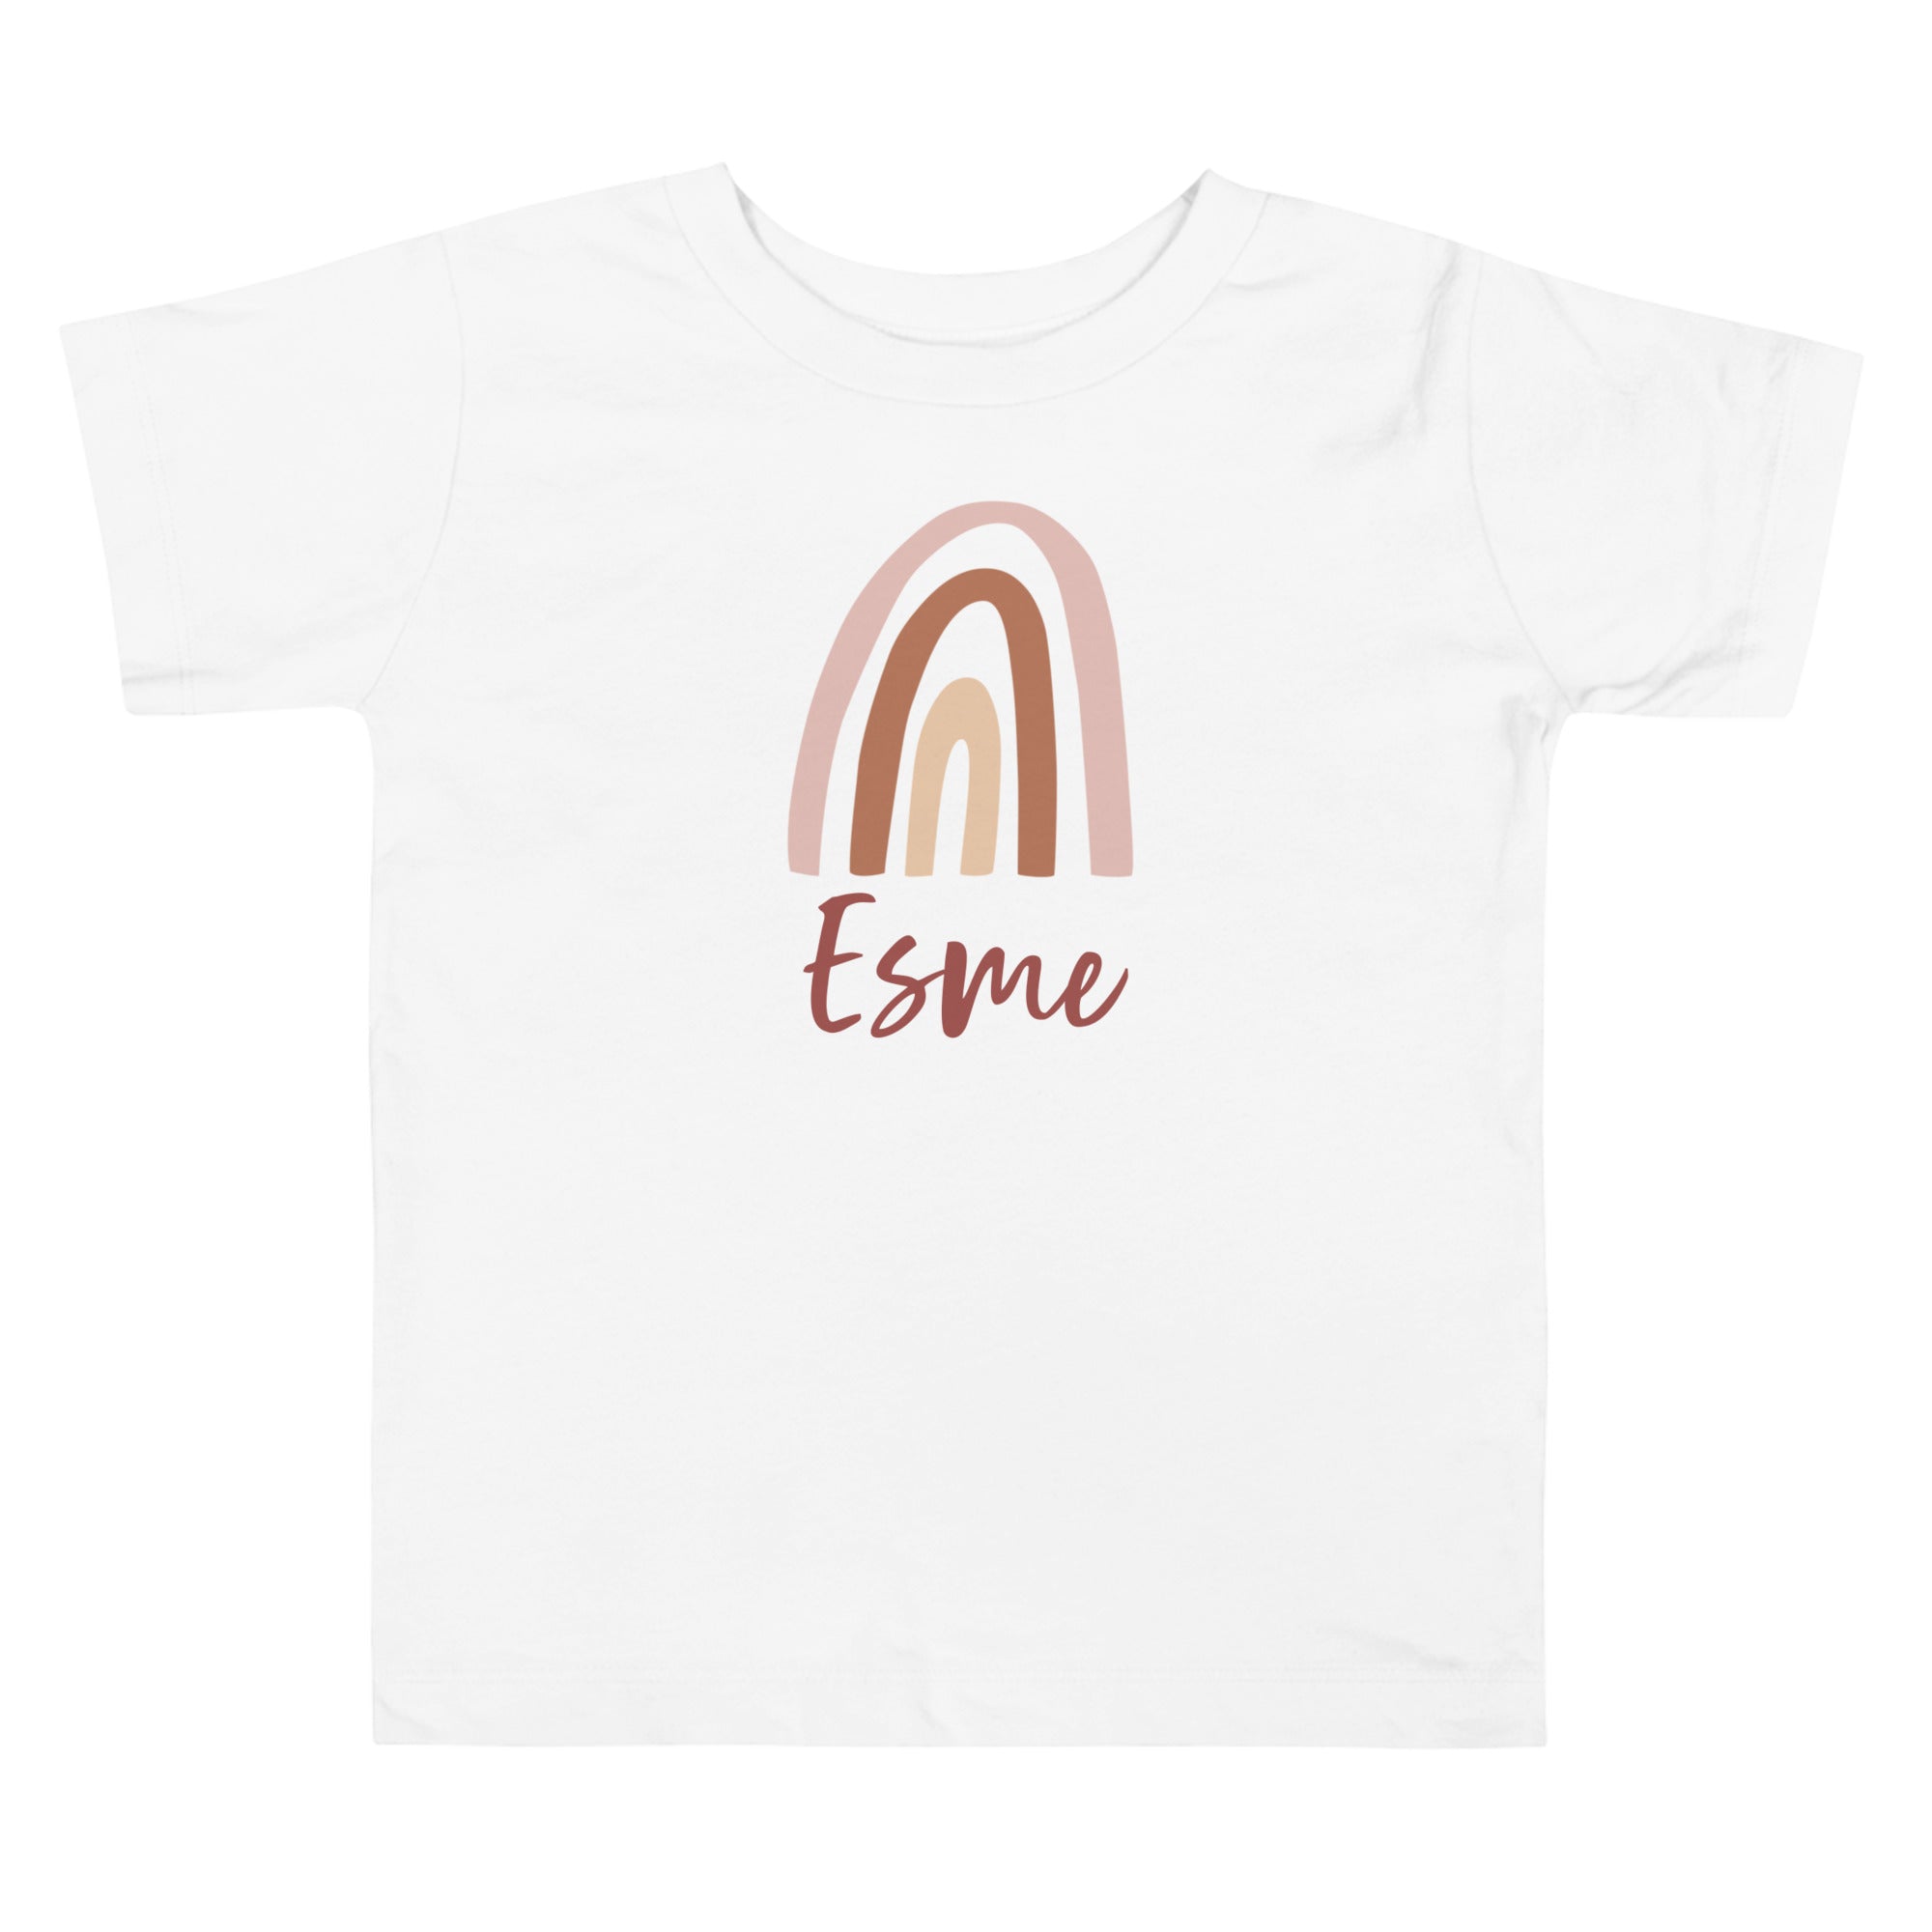 Kids personalized shirt with a rainbow design